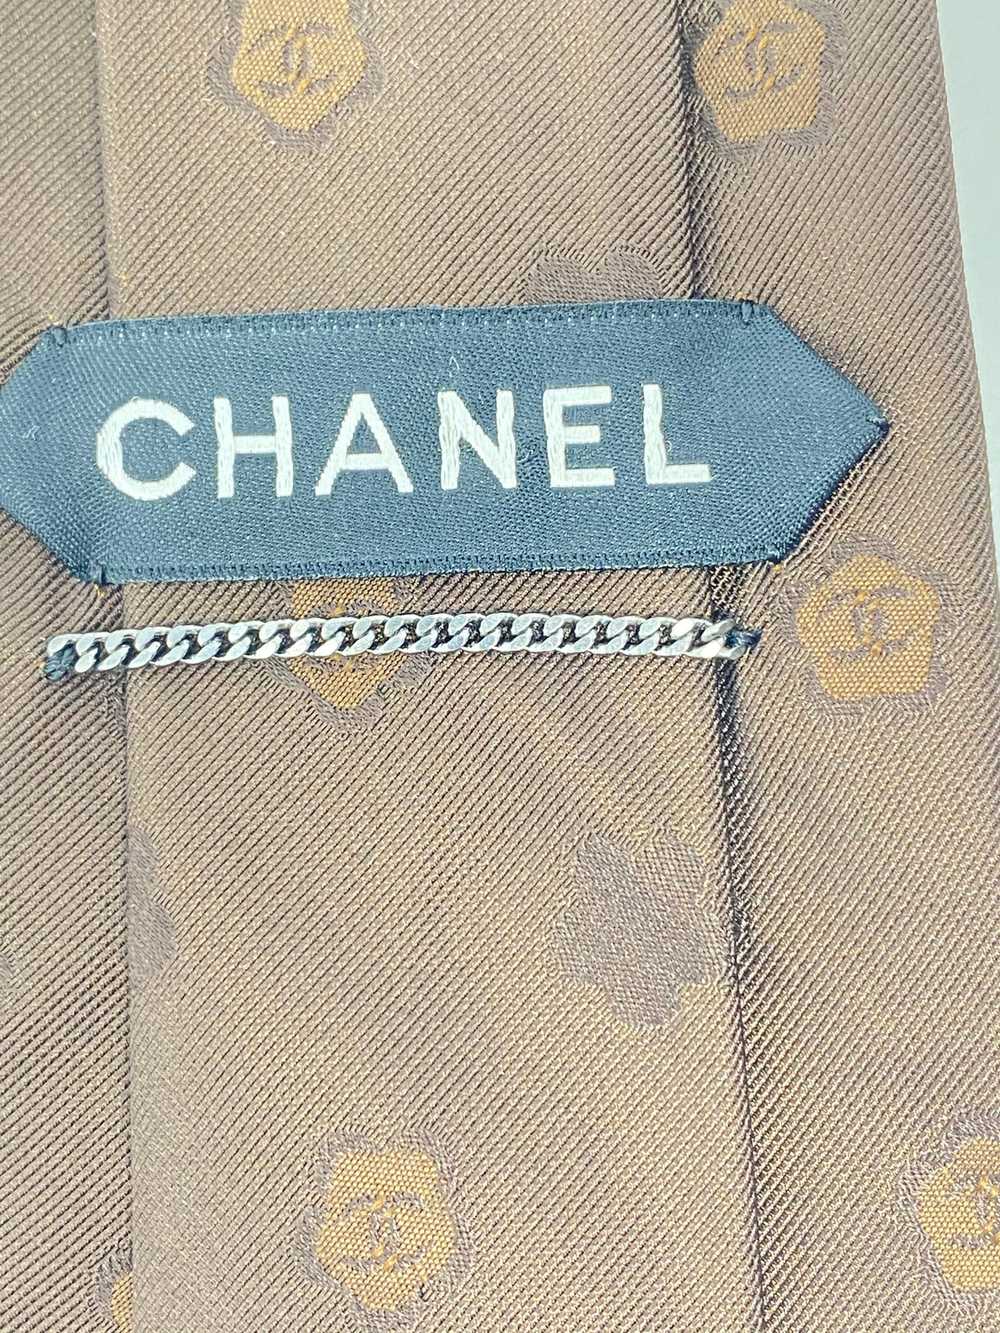 Chanel Chanel Neck Tie Brown Cherry Blossoms - image 6